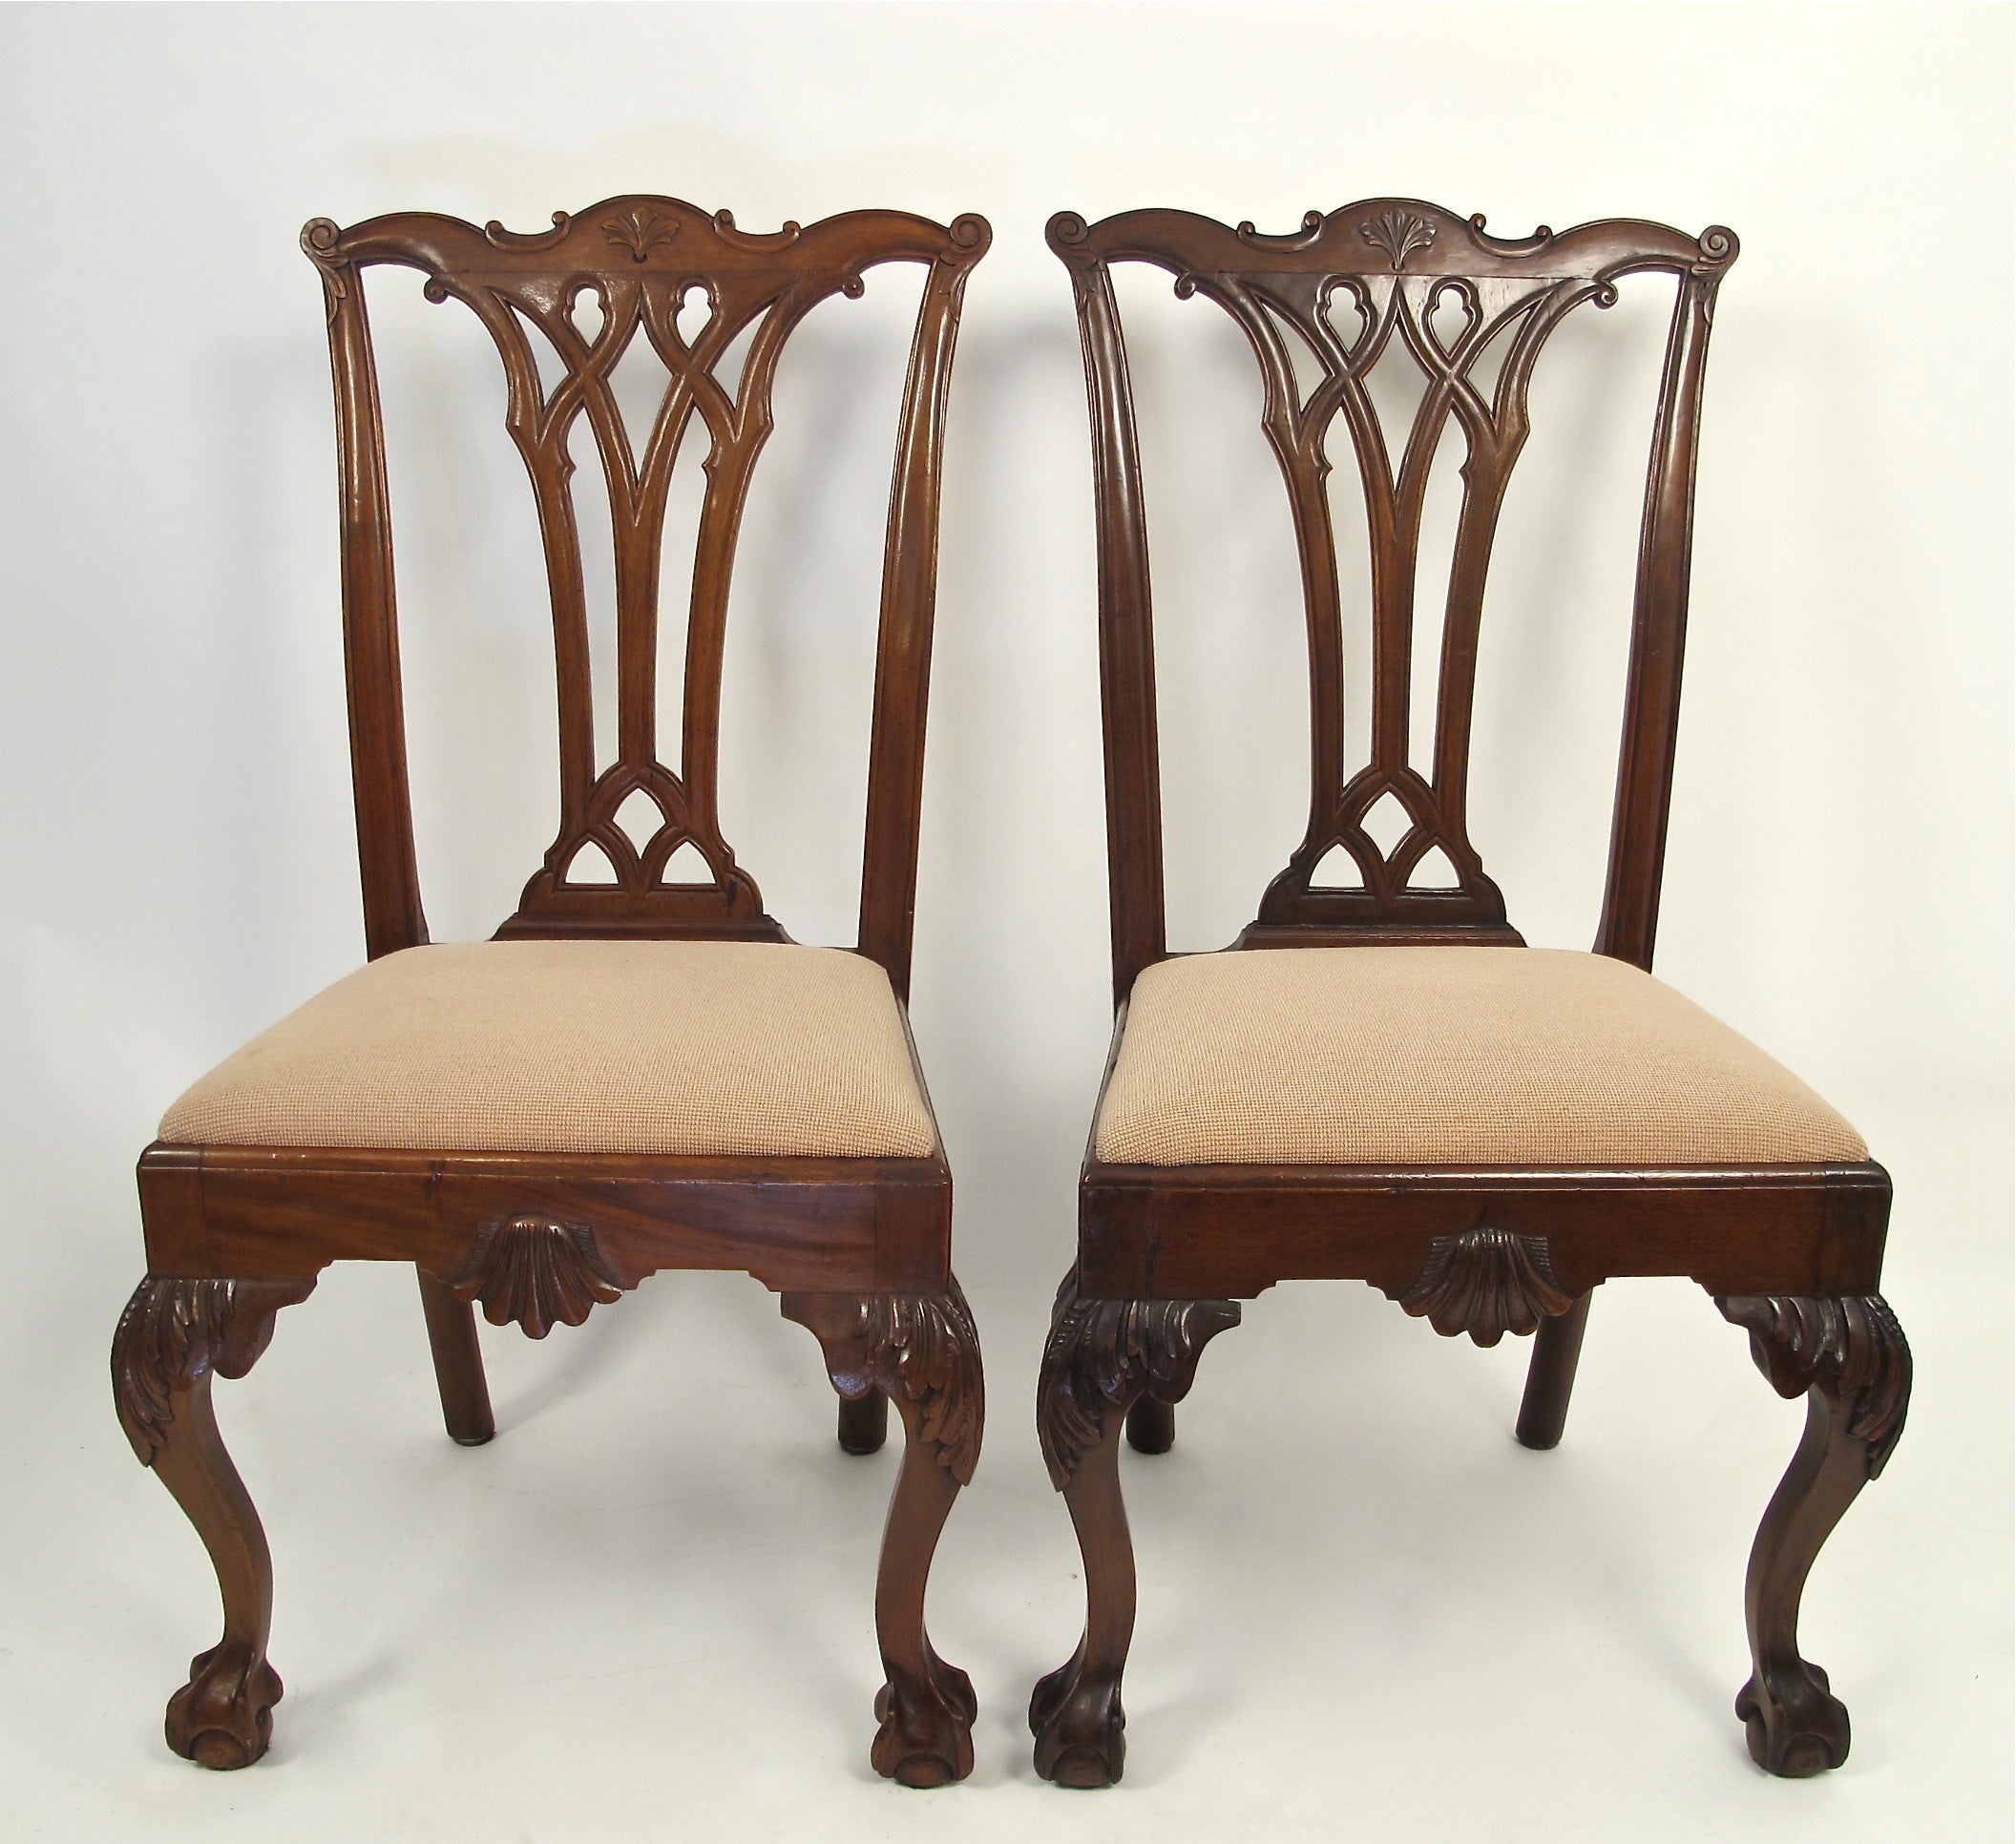 Set of Four Chippendale Dining/Side Chairs